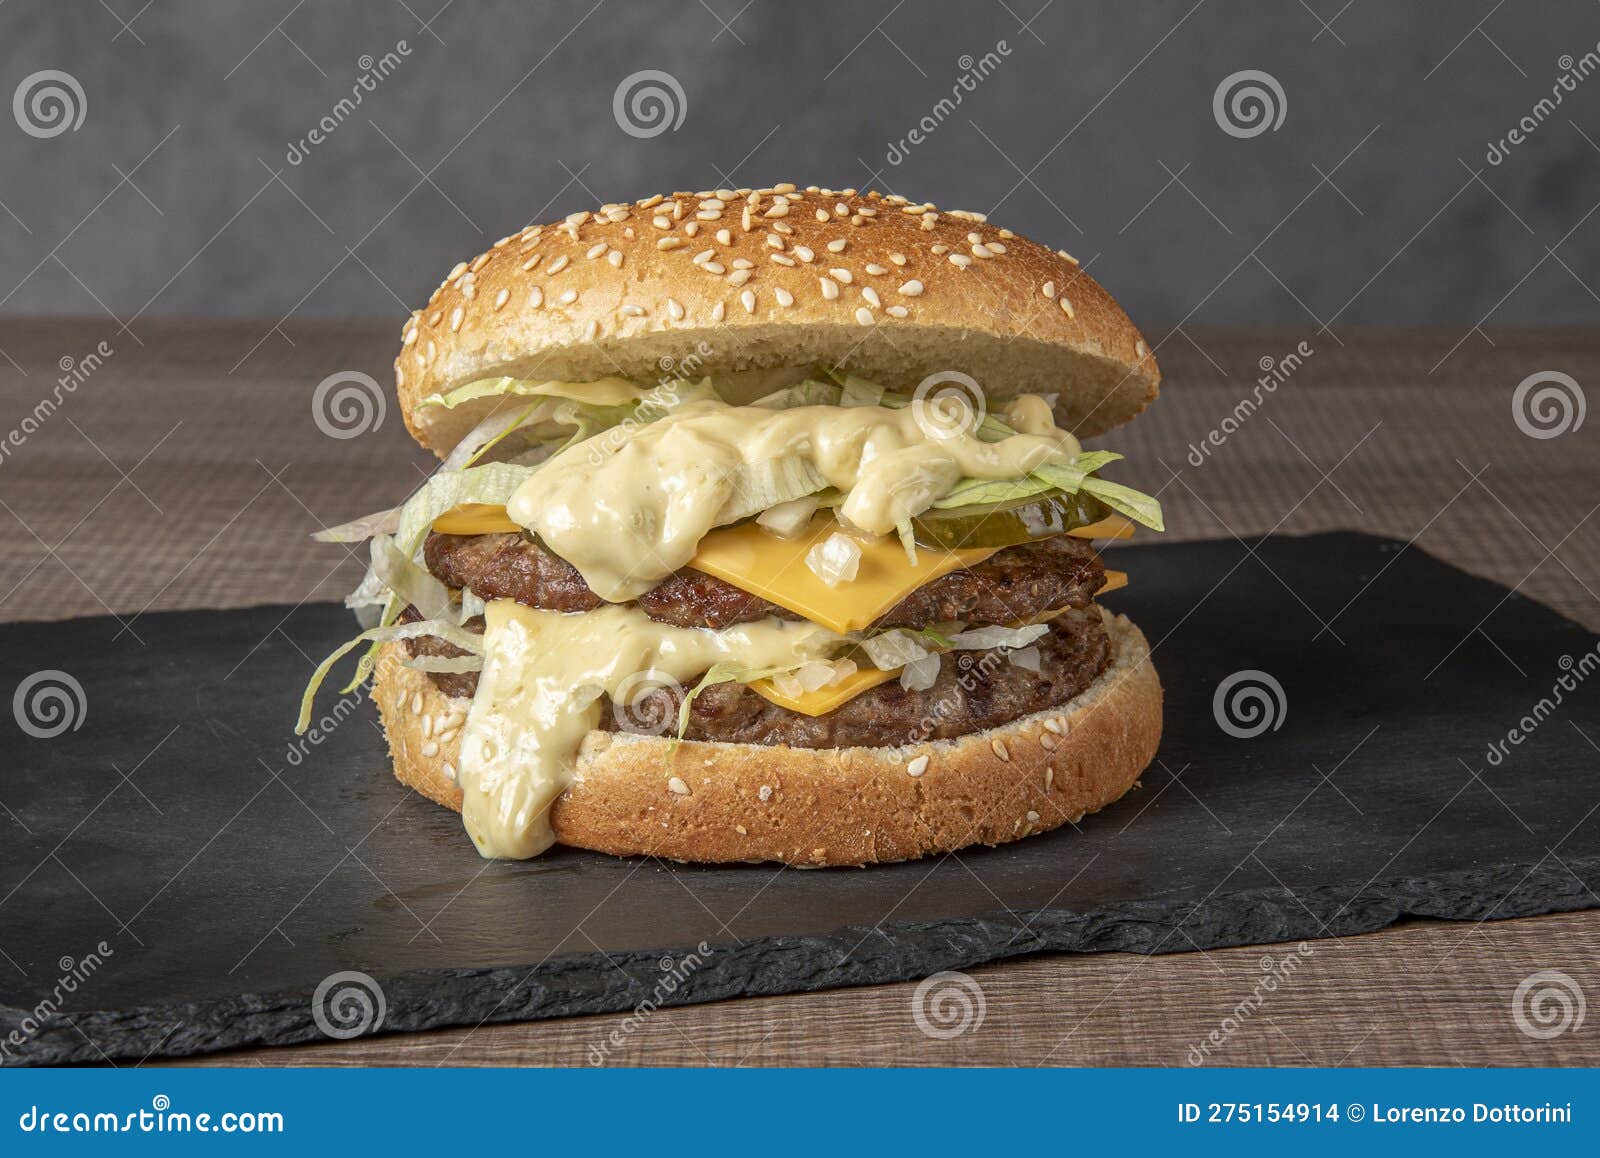 double hamburger with beef  in natural light